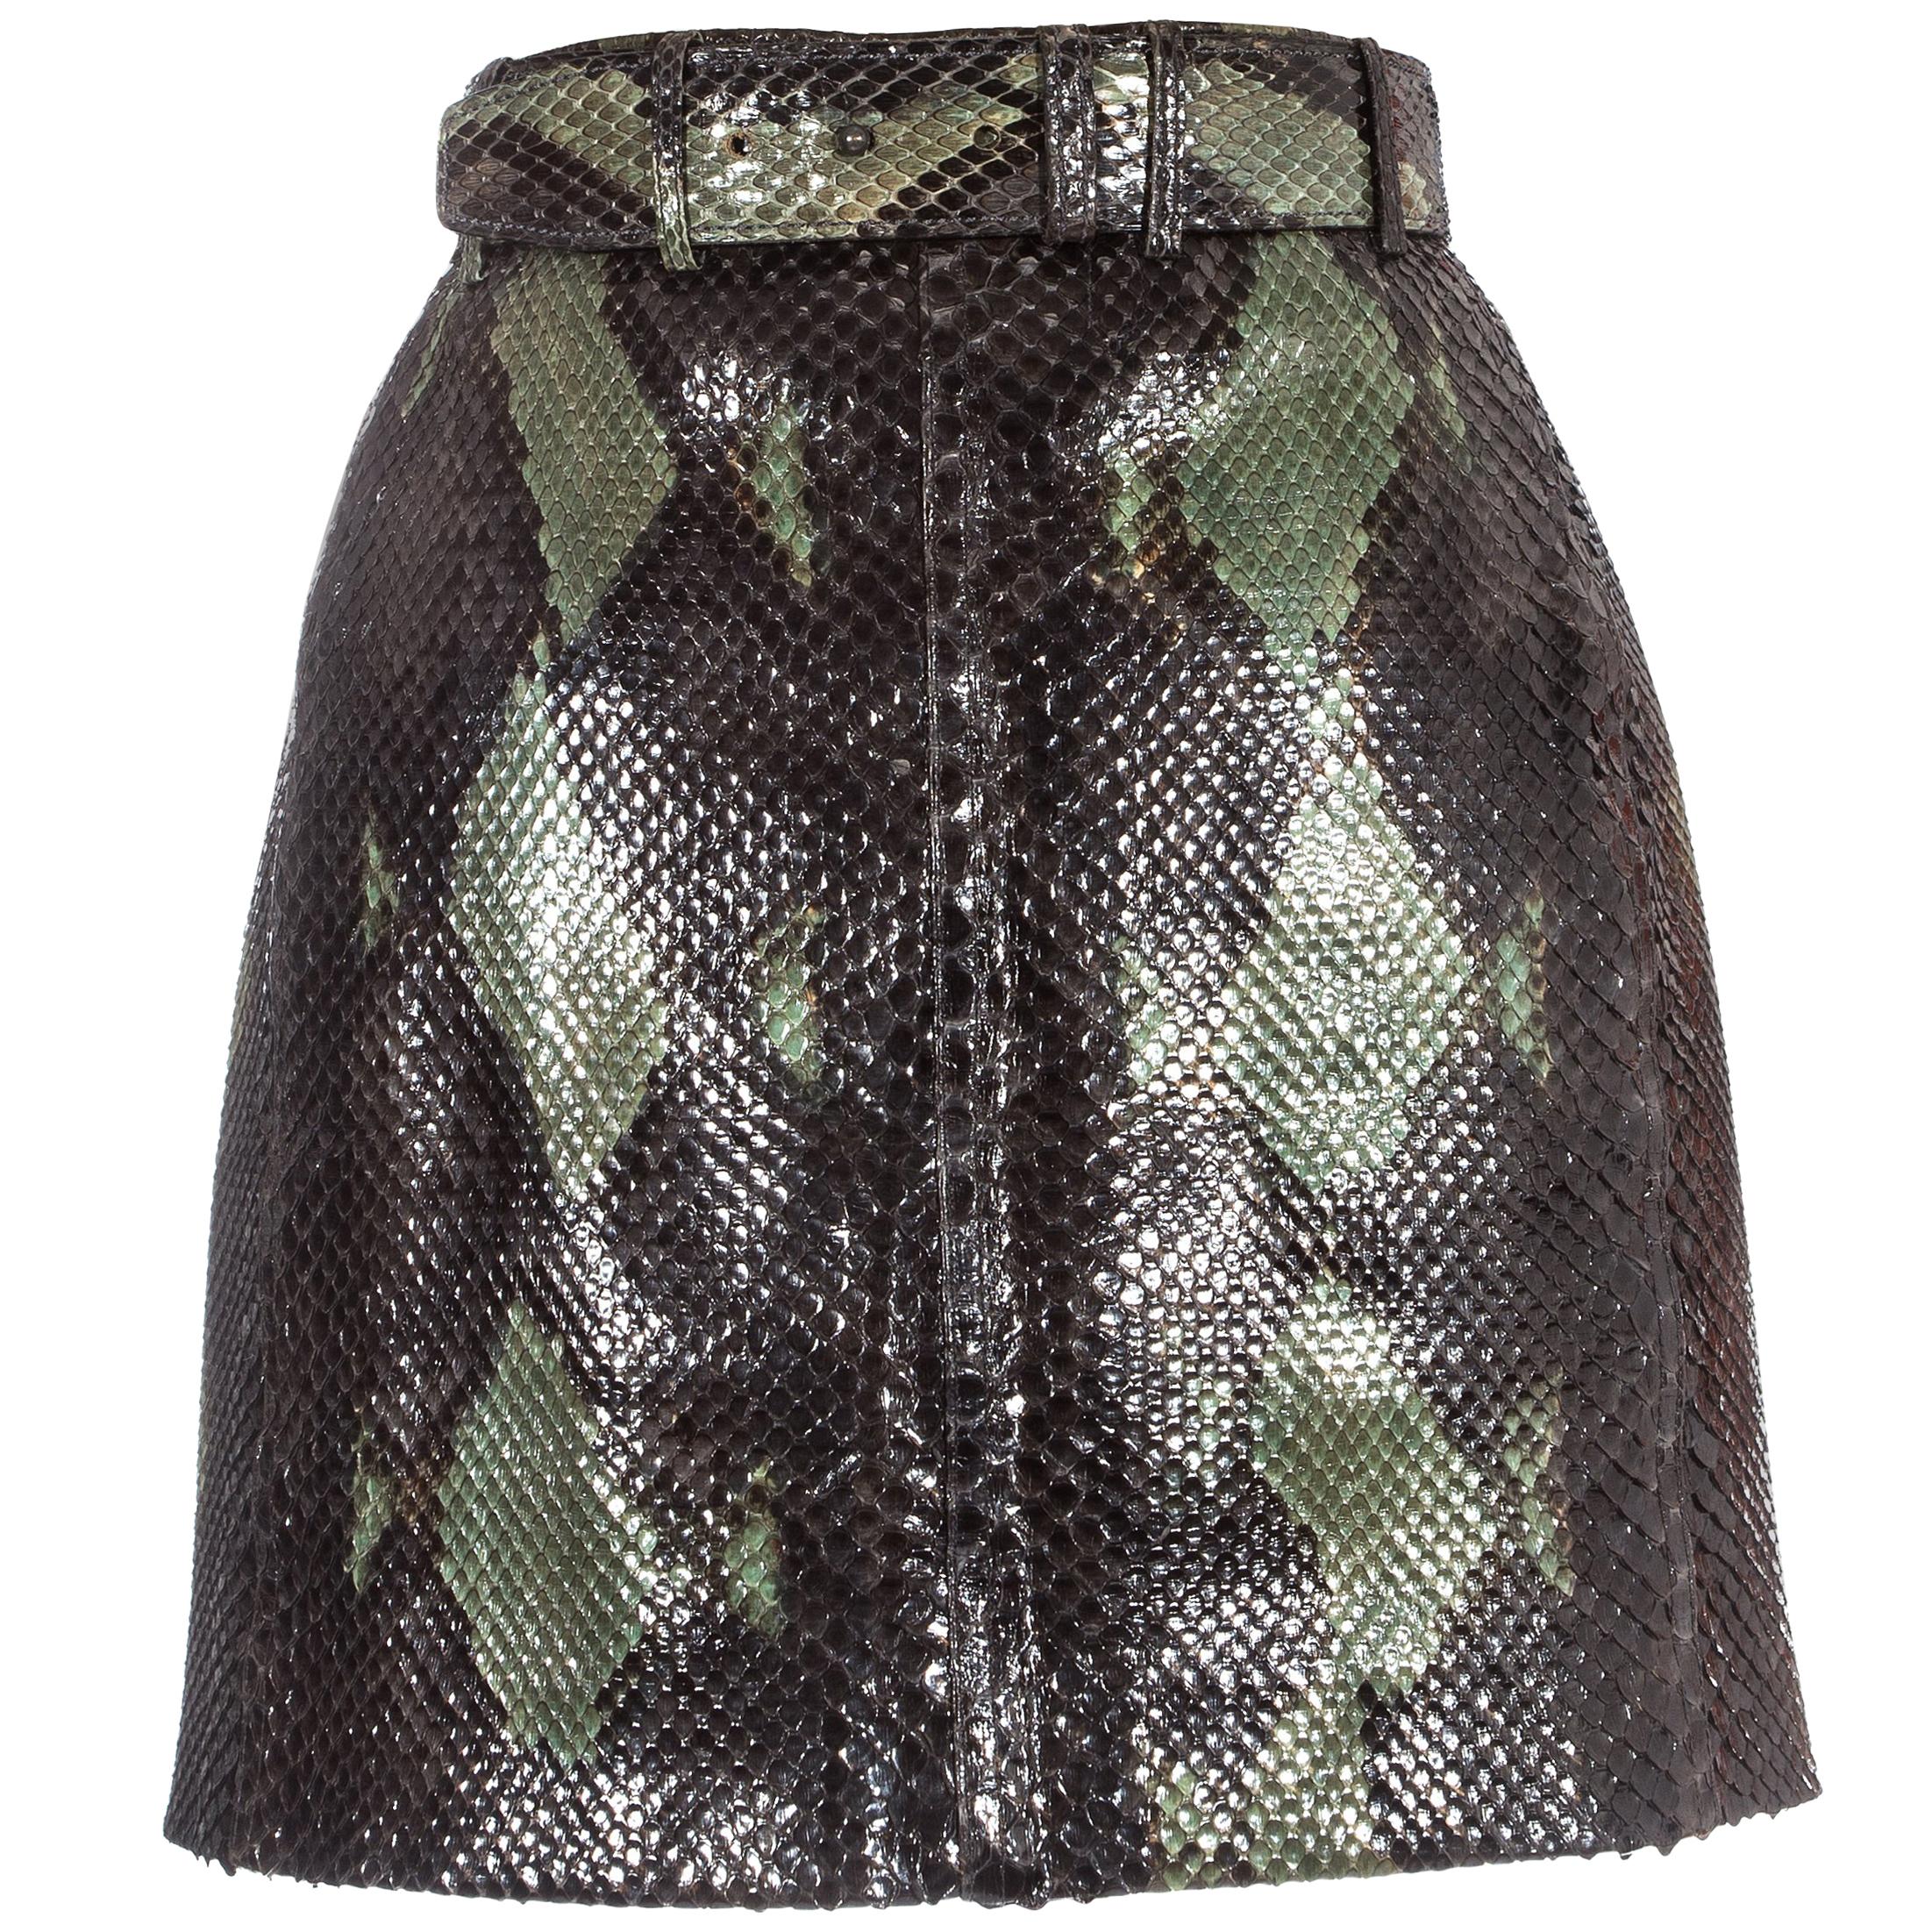 Azzedine Alaia green snakeskin lace-up mini skirt with matching belt, ss 1991